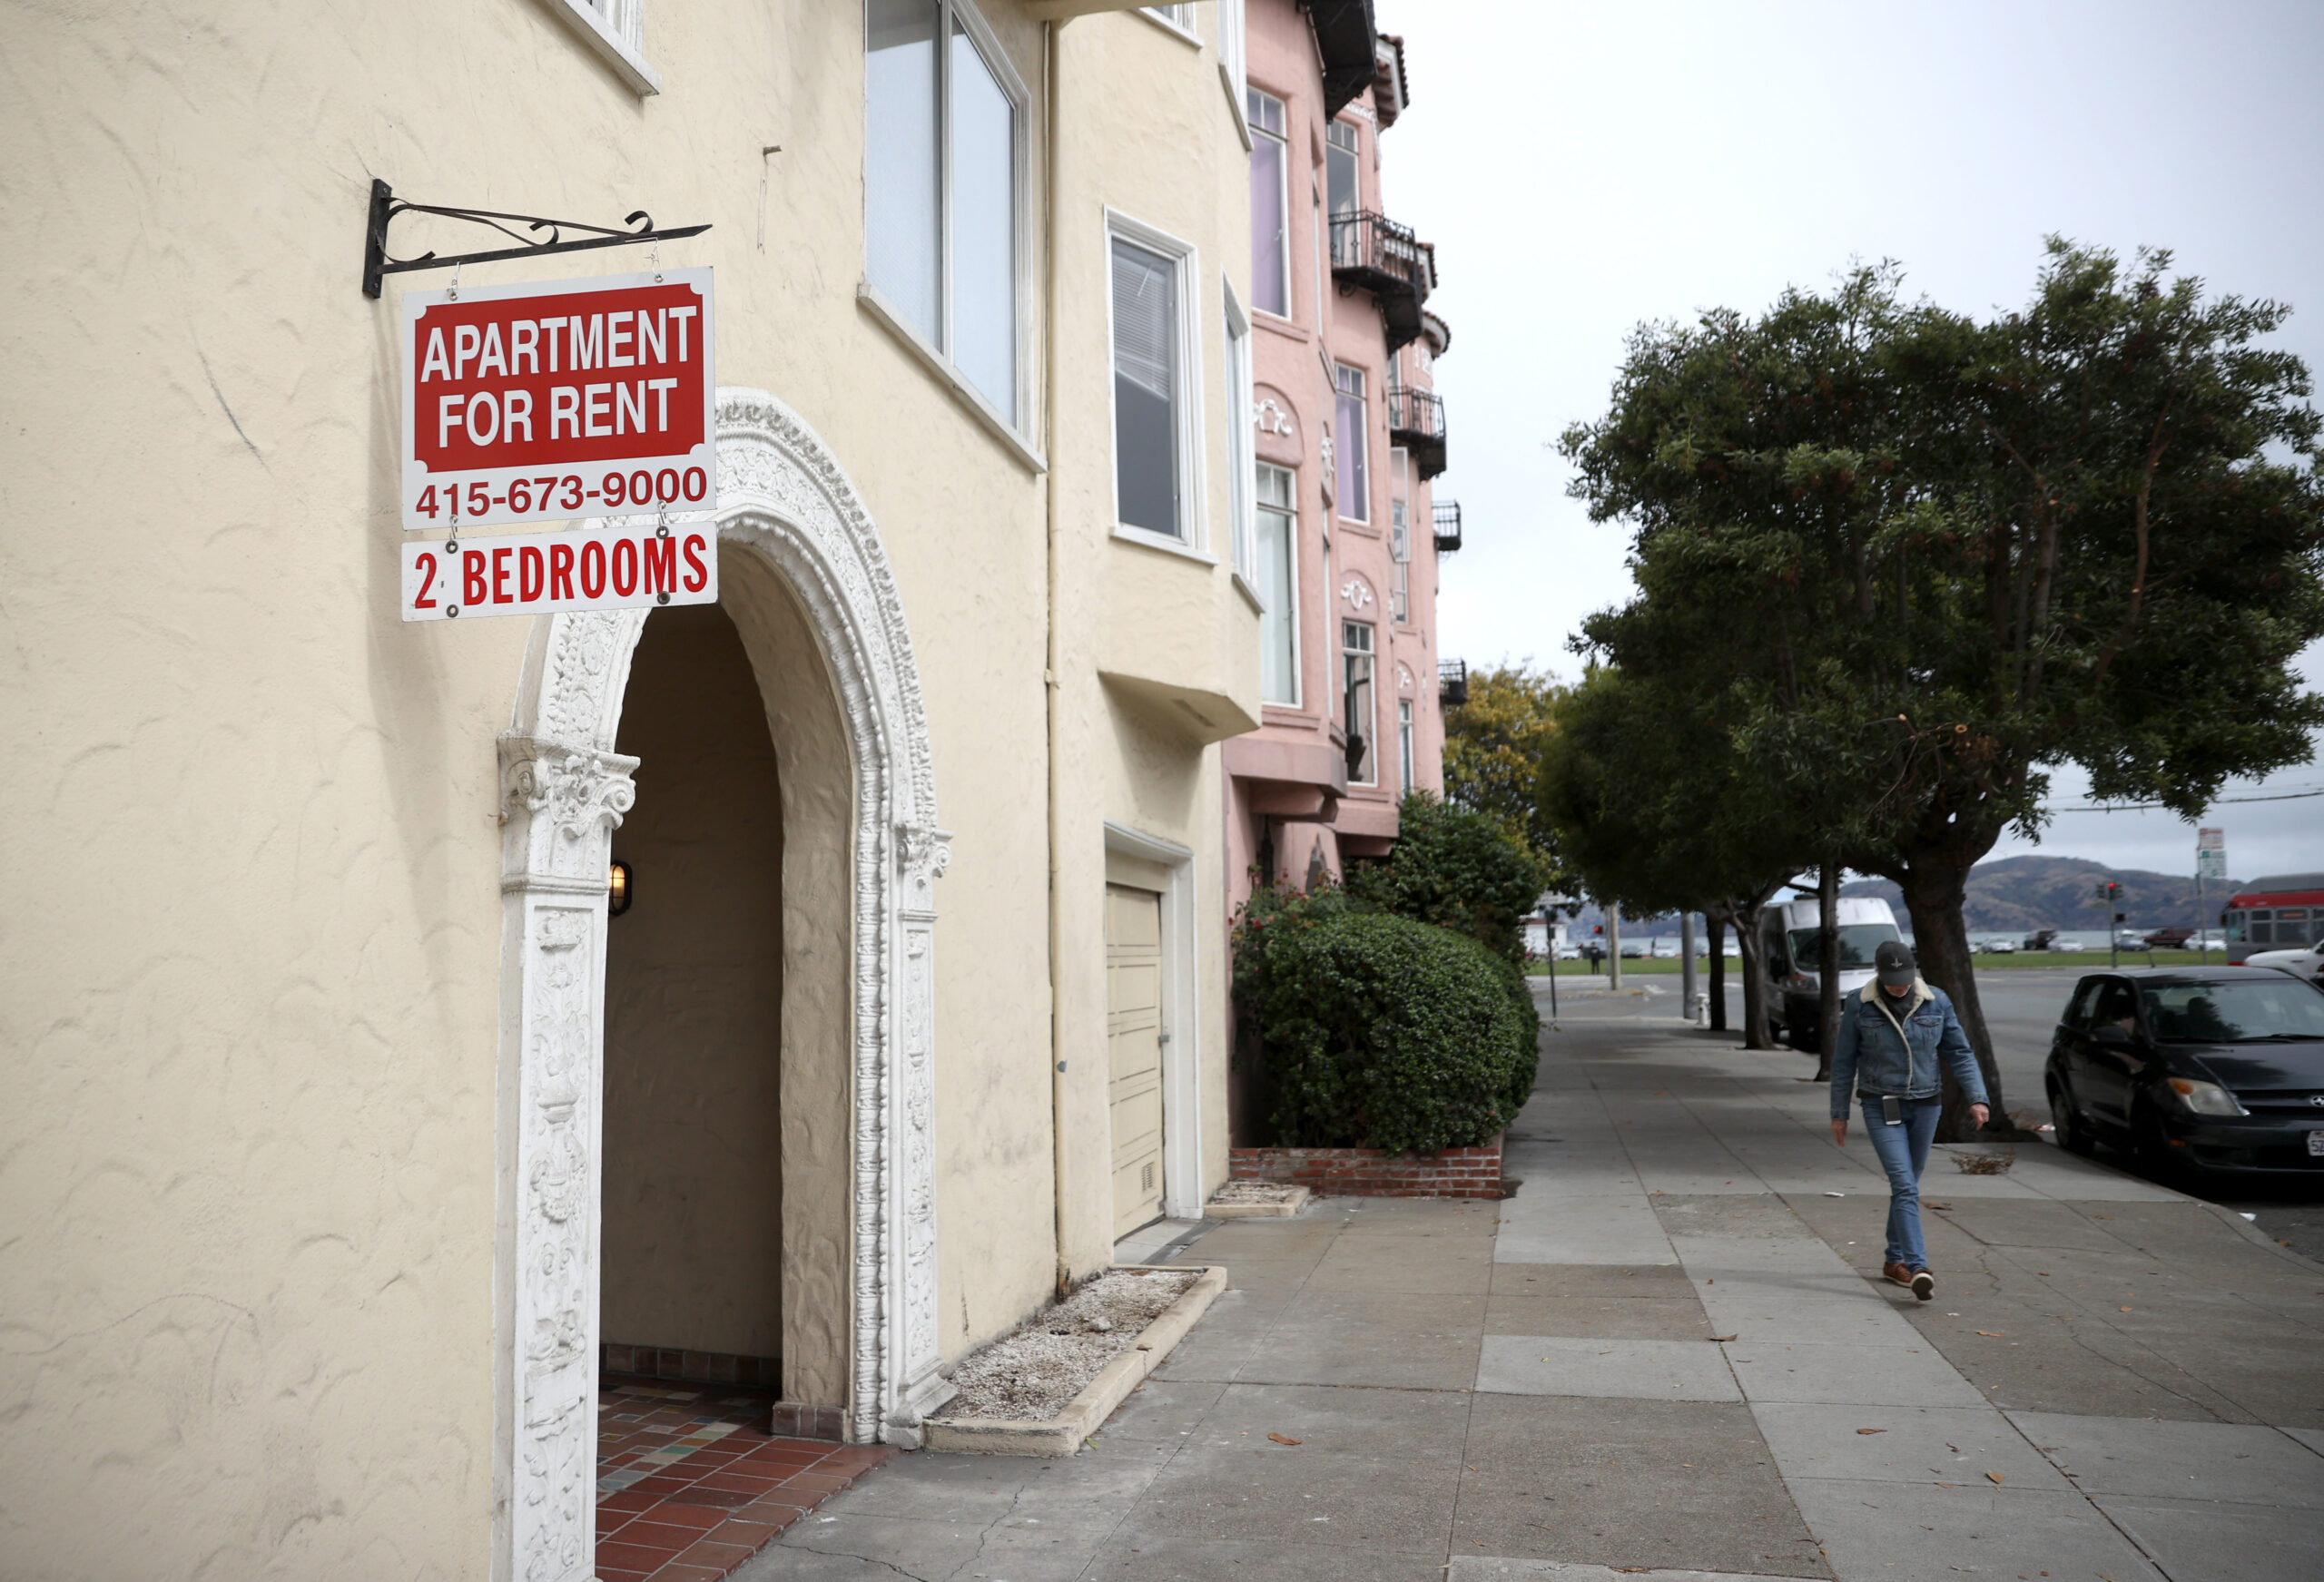 How San Francisco Ended Up With the Nation’s Richest Renters